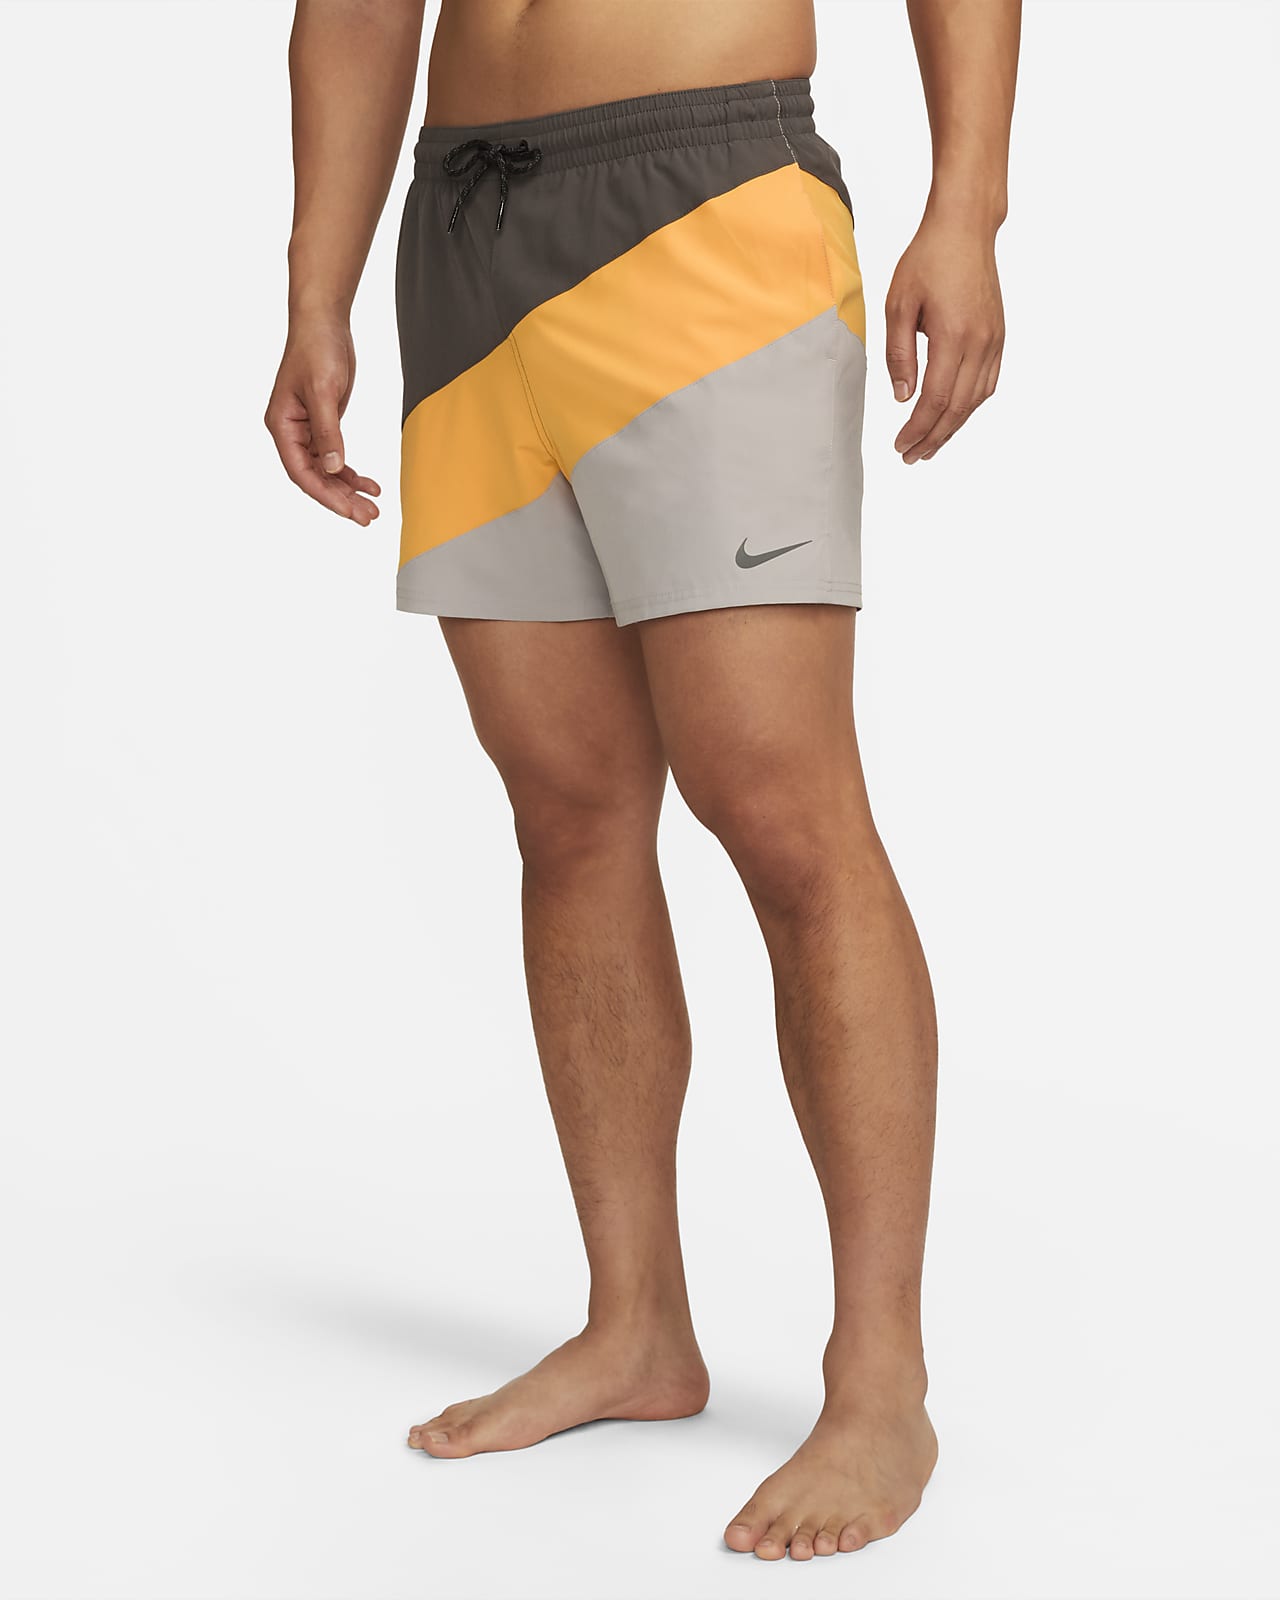 Men's 13cm (approx.) Volley Swimming Shorts